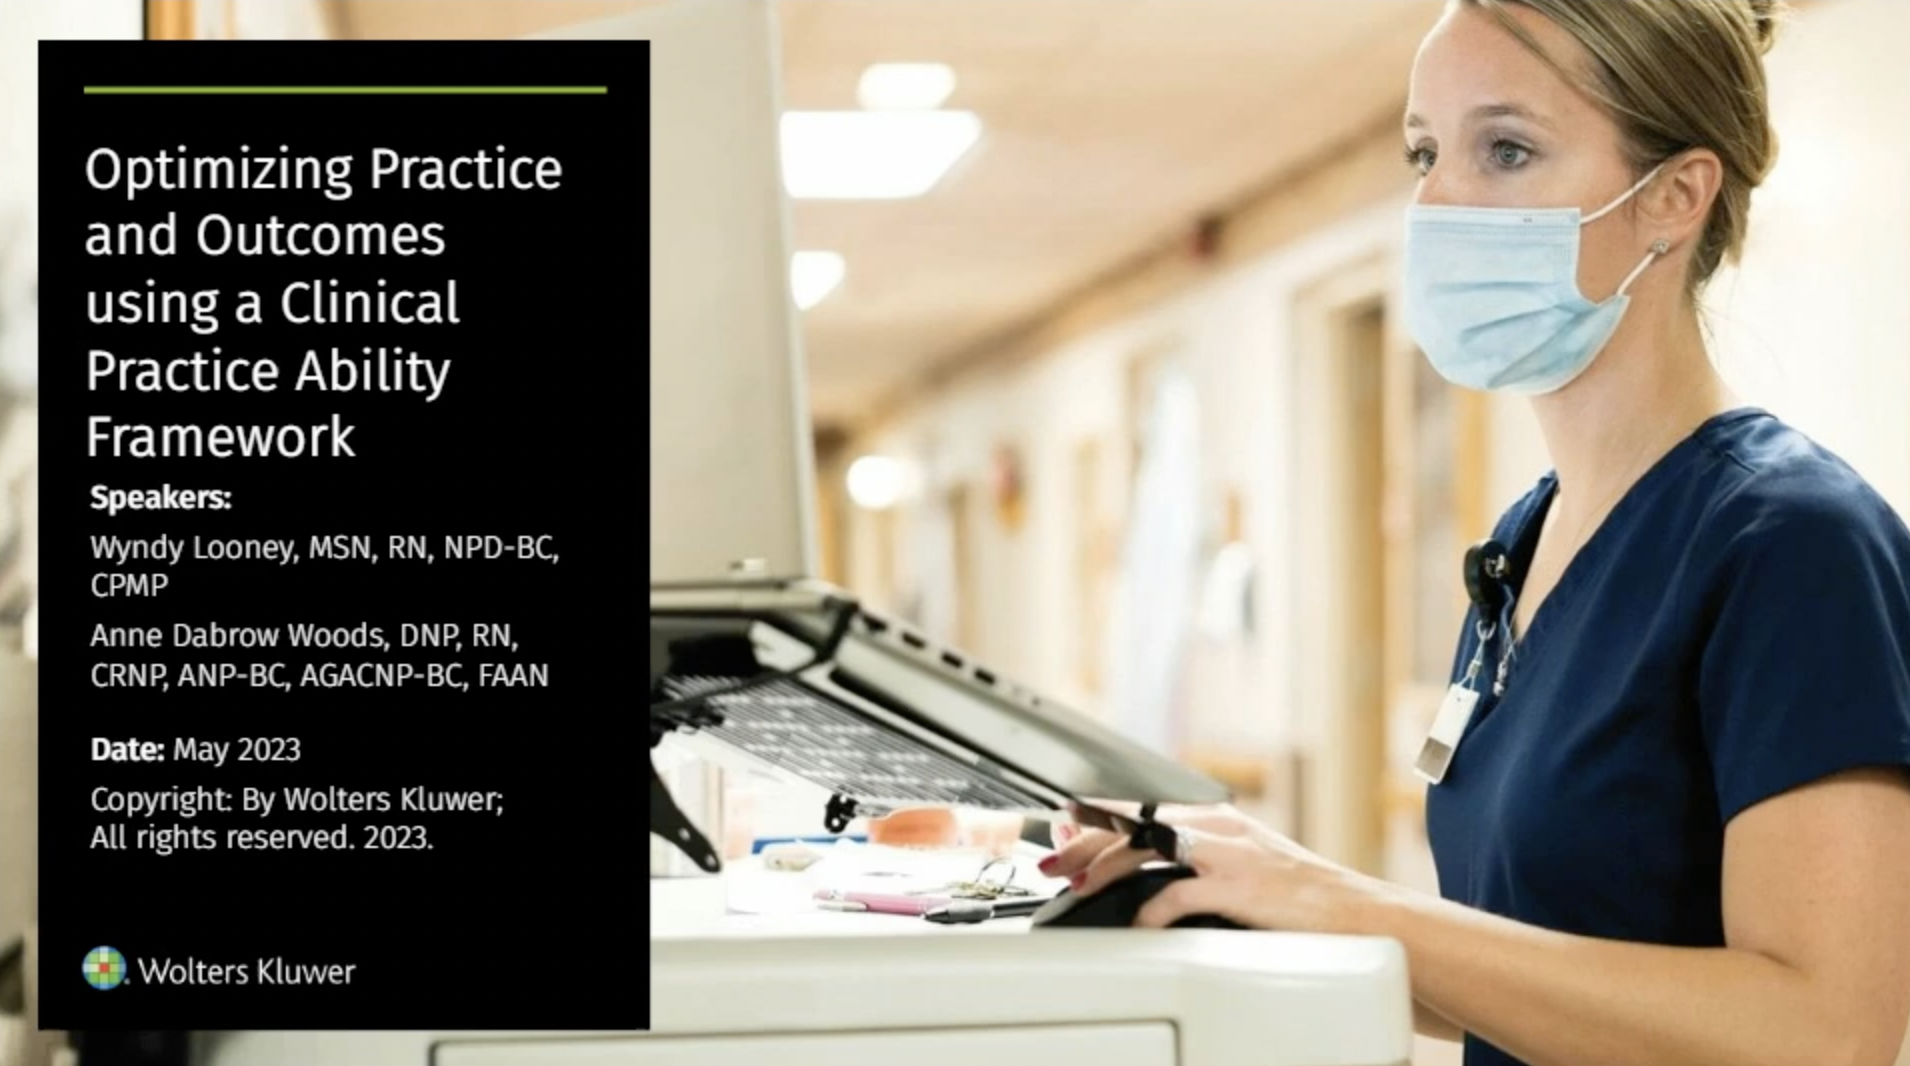 Optimizing practice and outcomes using a clinical practice ability framework webinar cover image